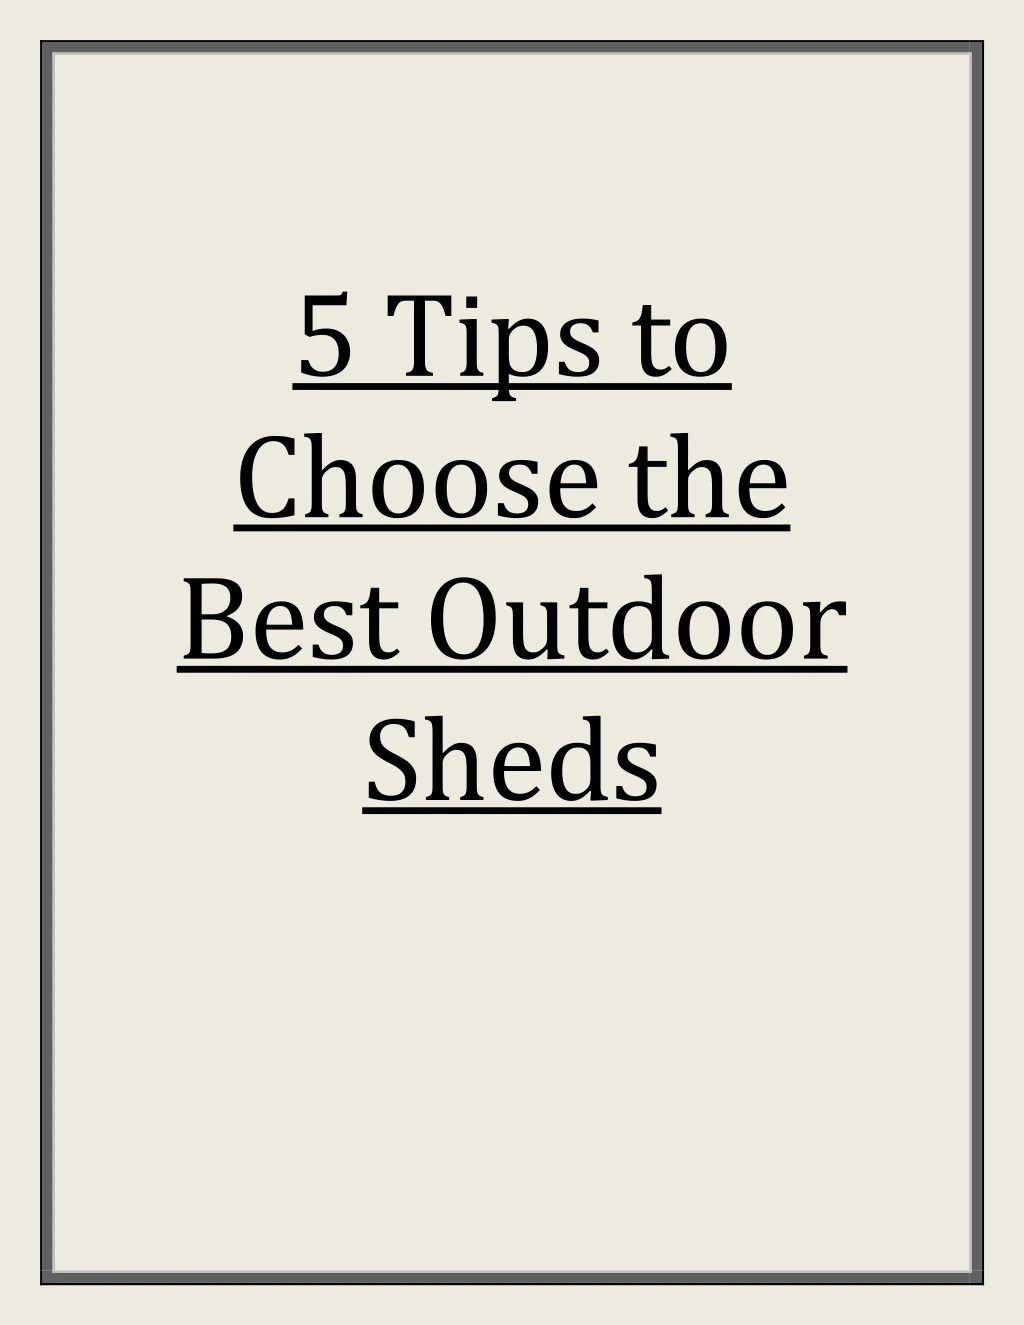 5 tips to choose the best outdoor sheds